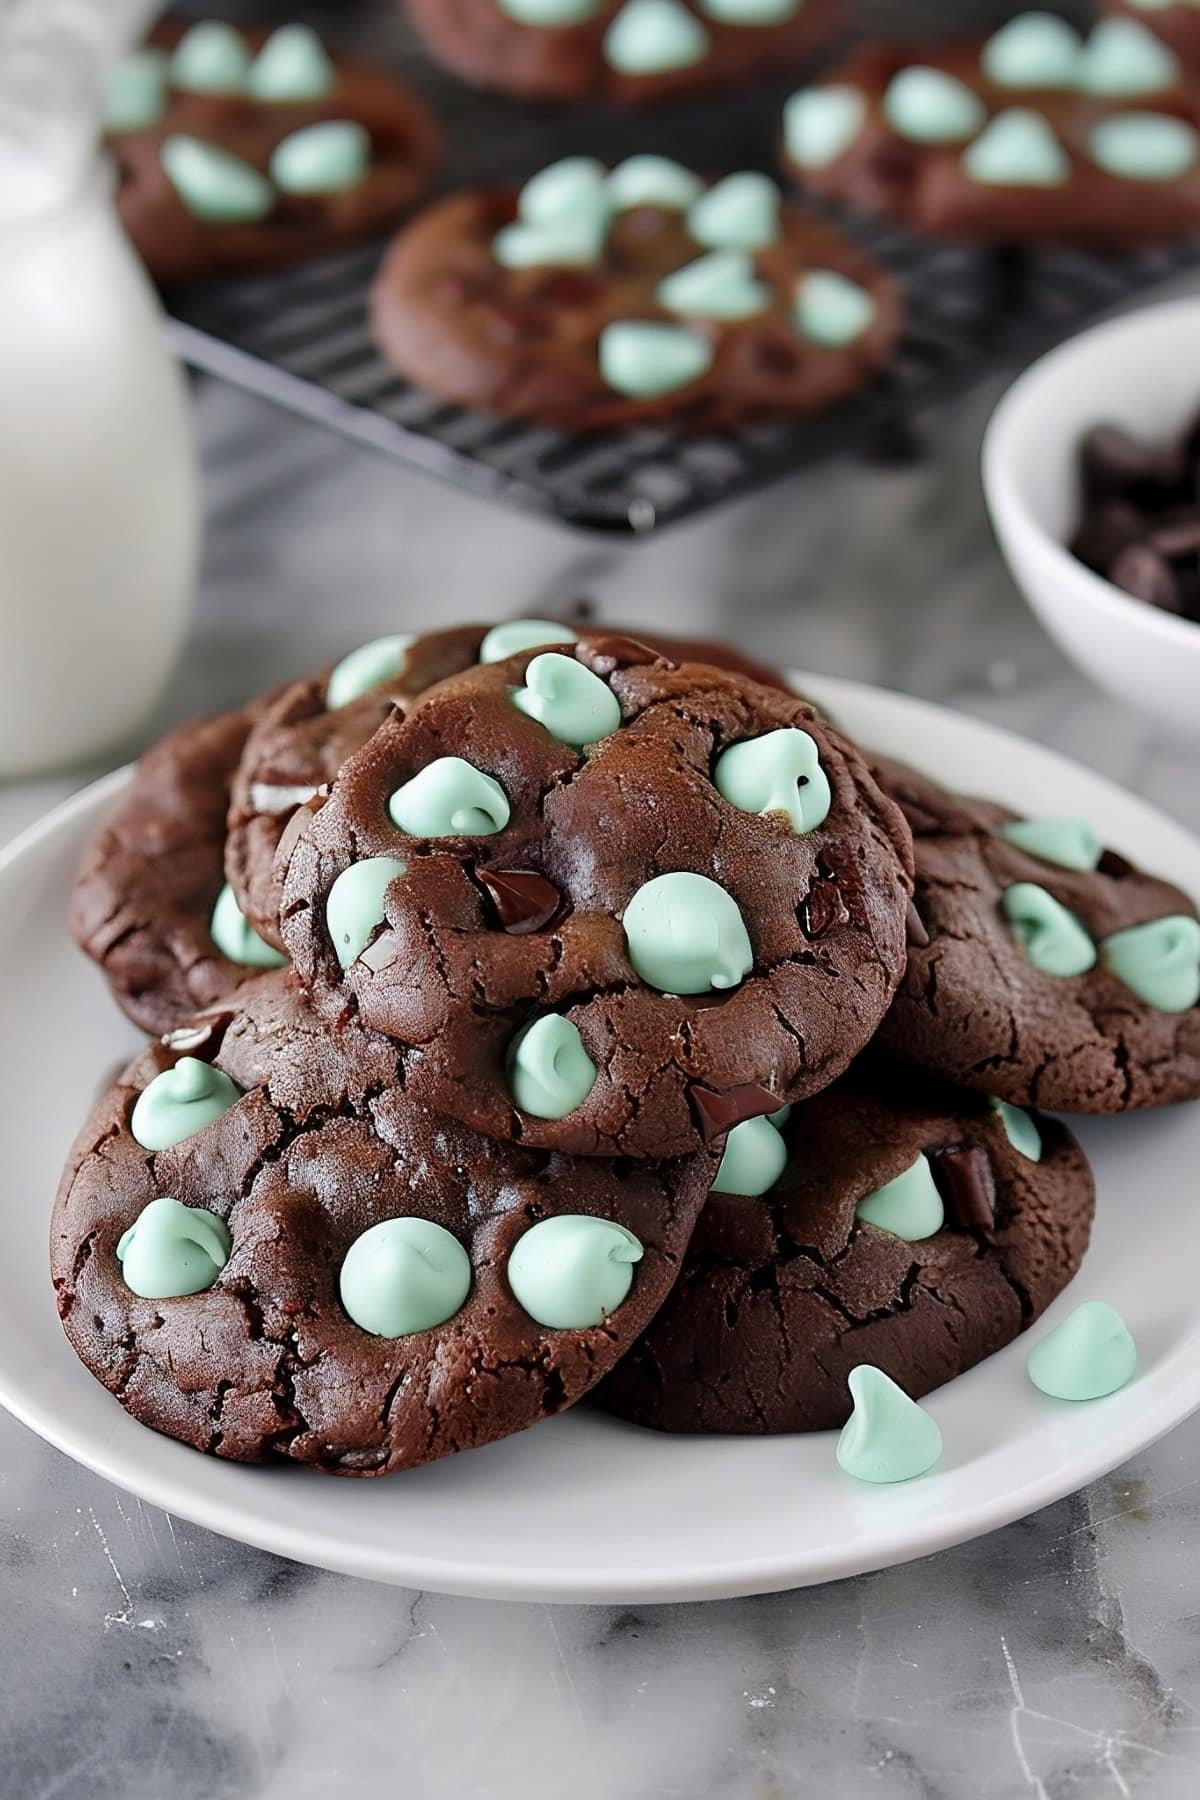 Chewy homemade chocolate mint chip cookies served with milk.